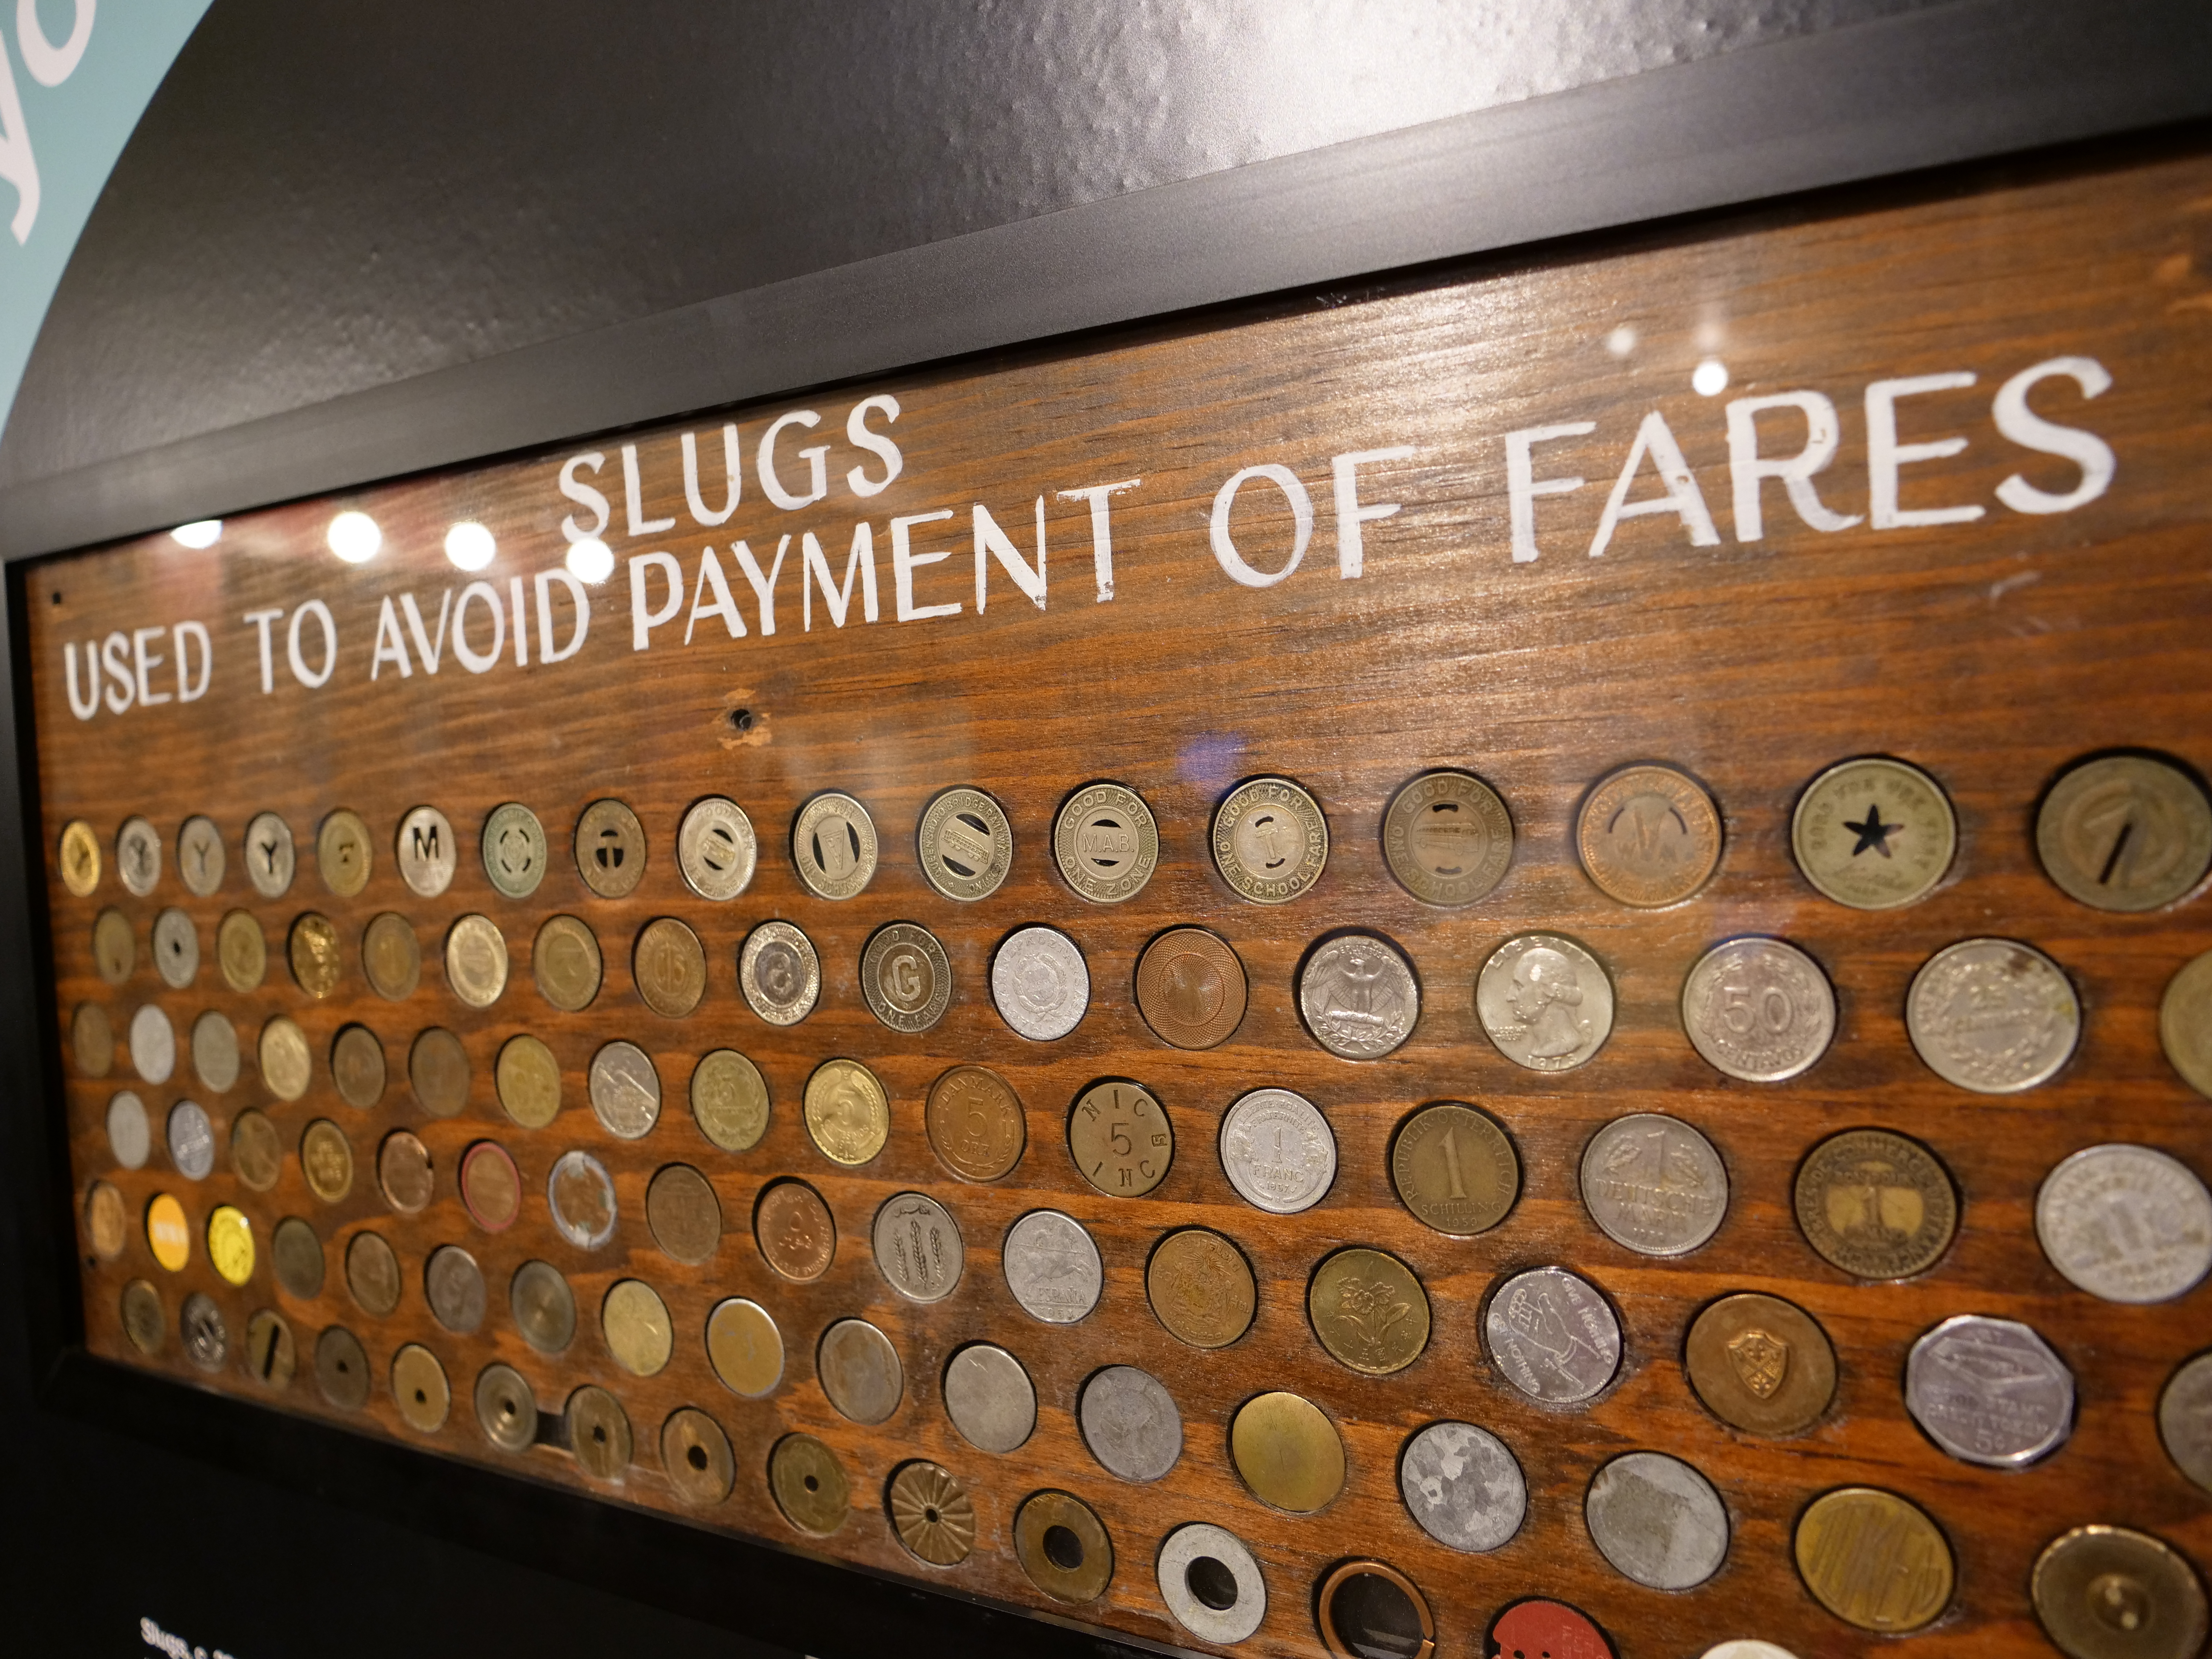 NYC Token Slugs used to avoid payment of fares on NYC MTA subway